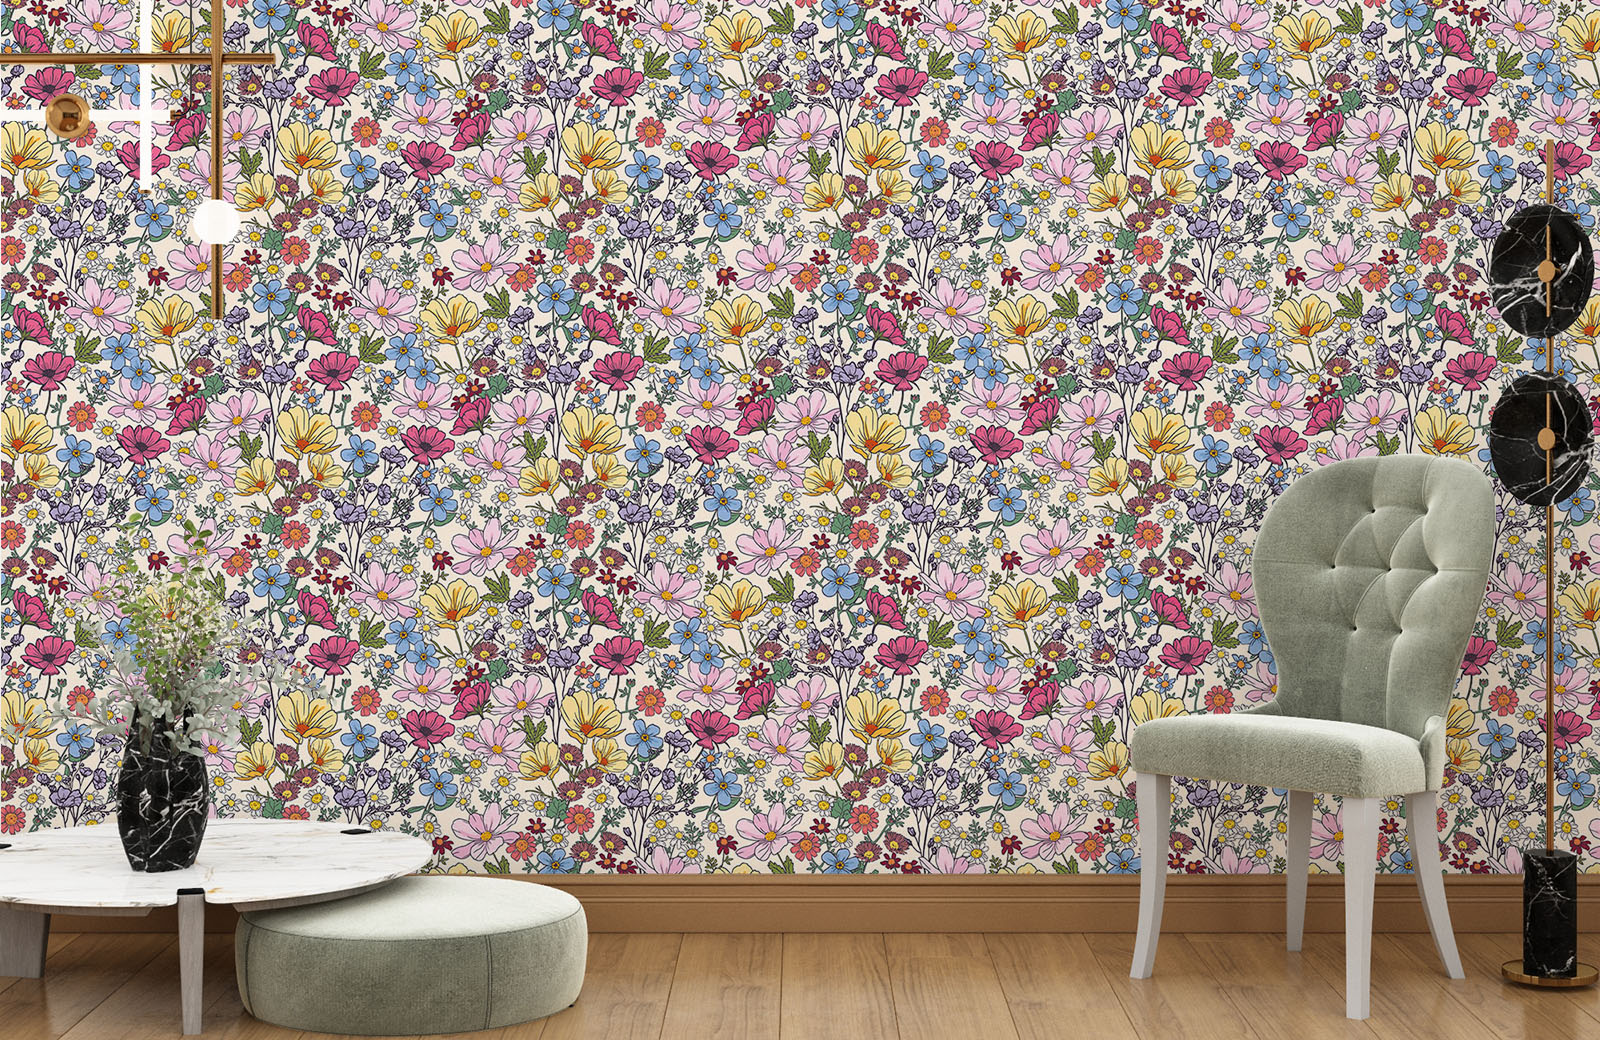 multi-coloured-flowers-in-garden-wallpaper-with-chair